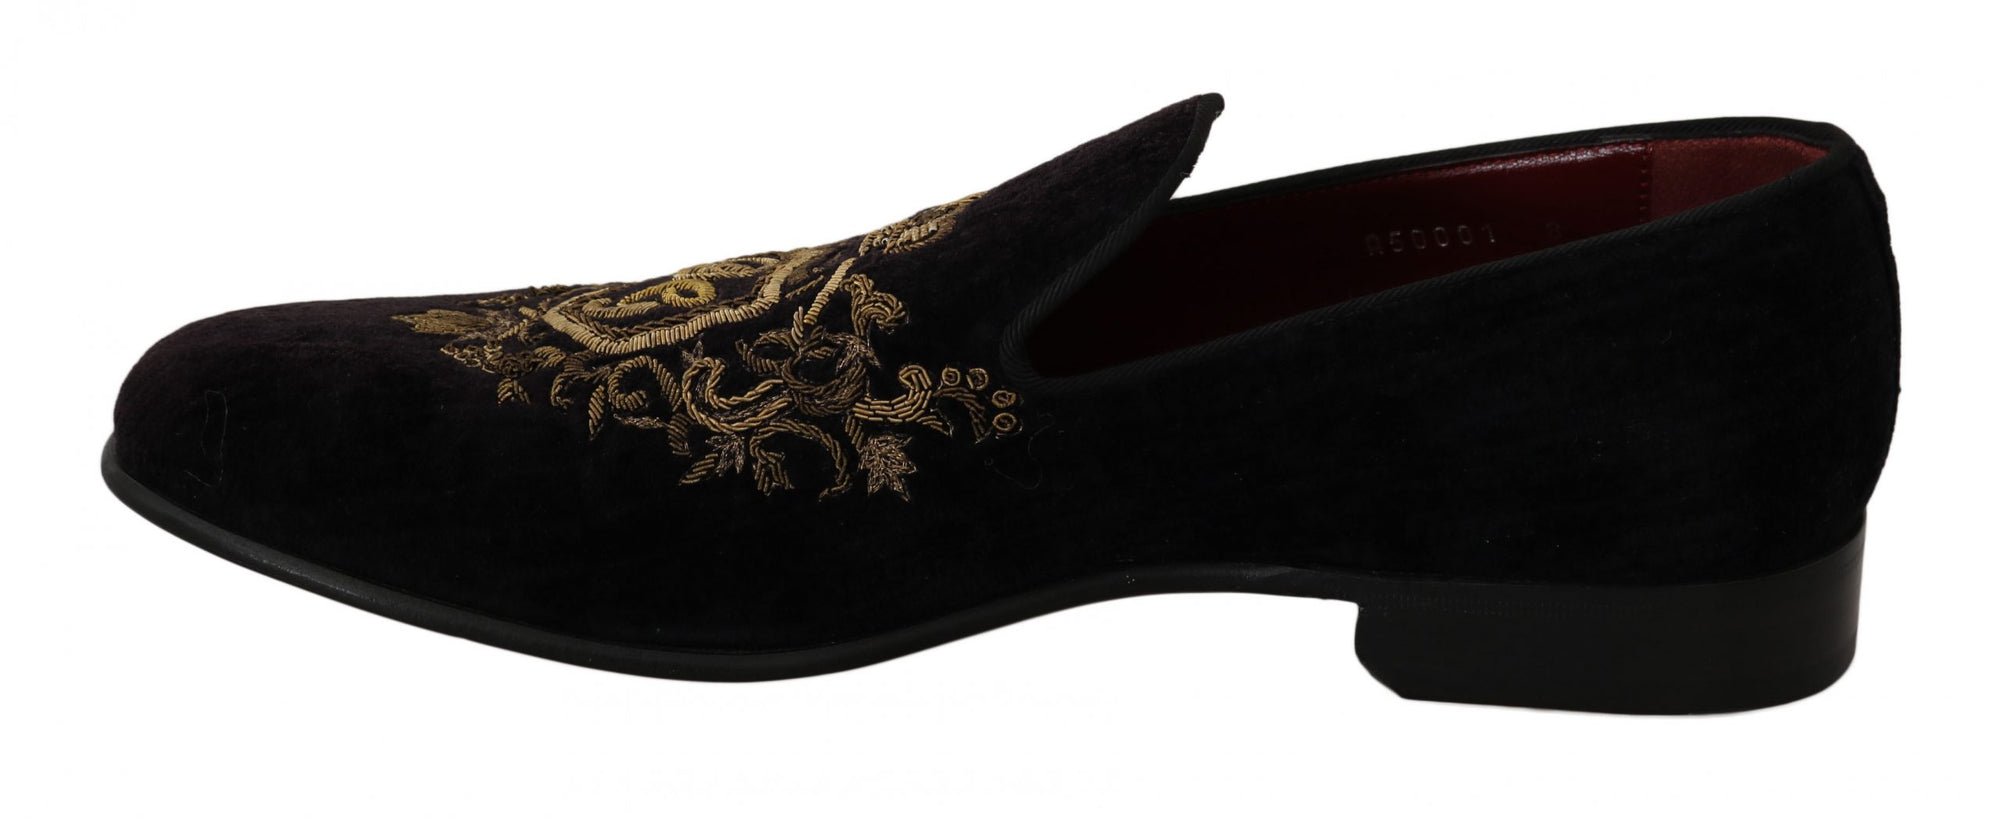 Elegant Black Loafers with Gold Crown Embroidery